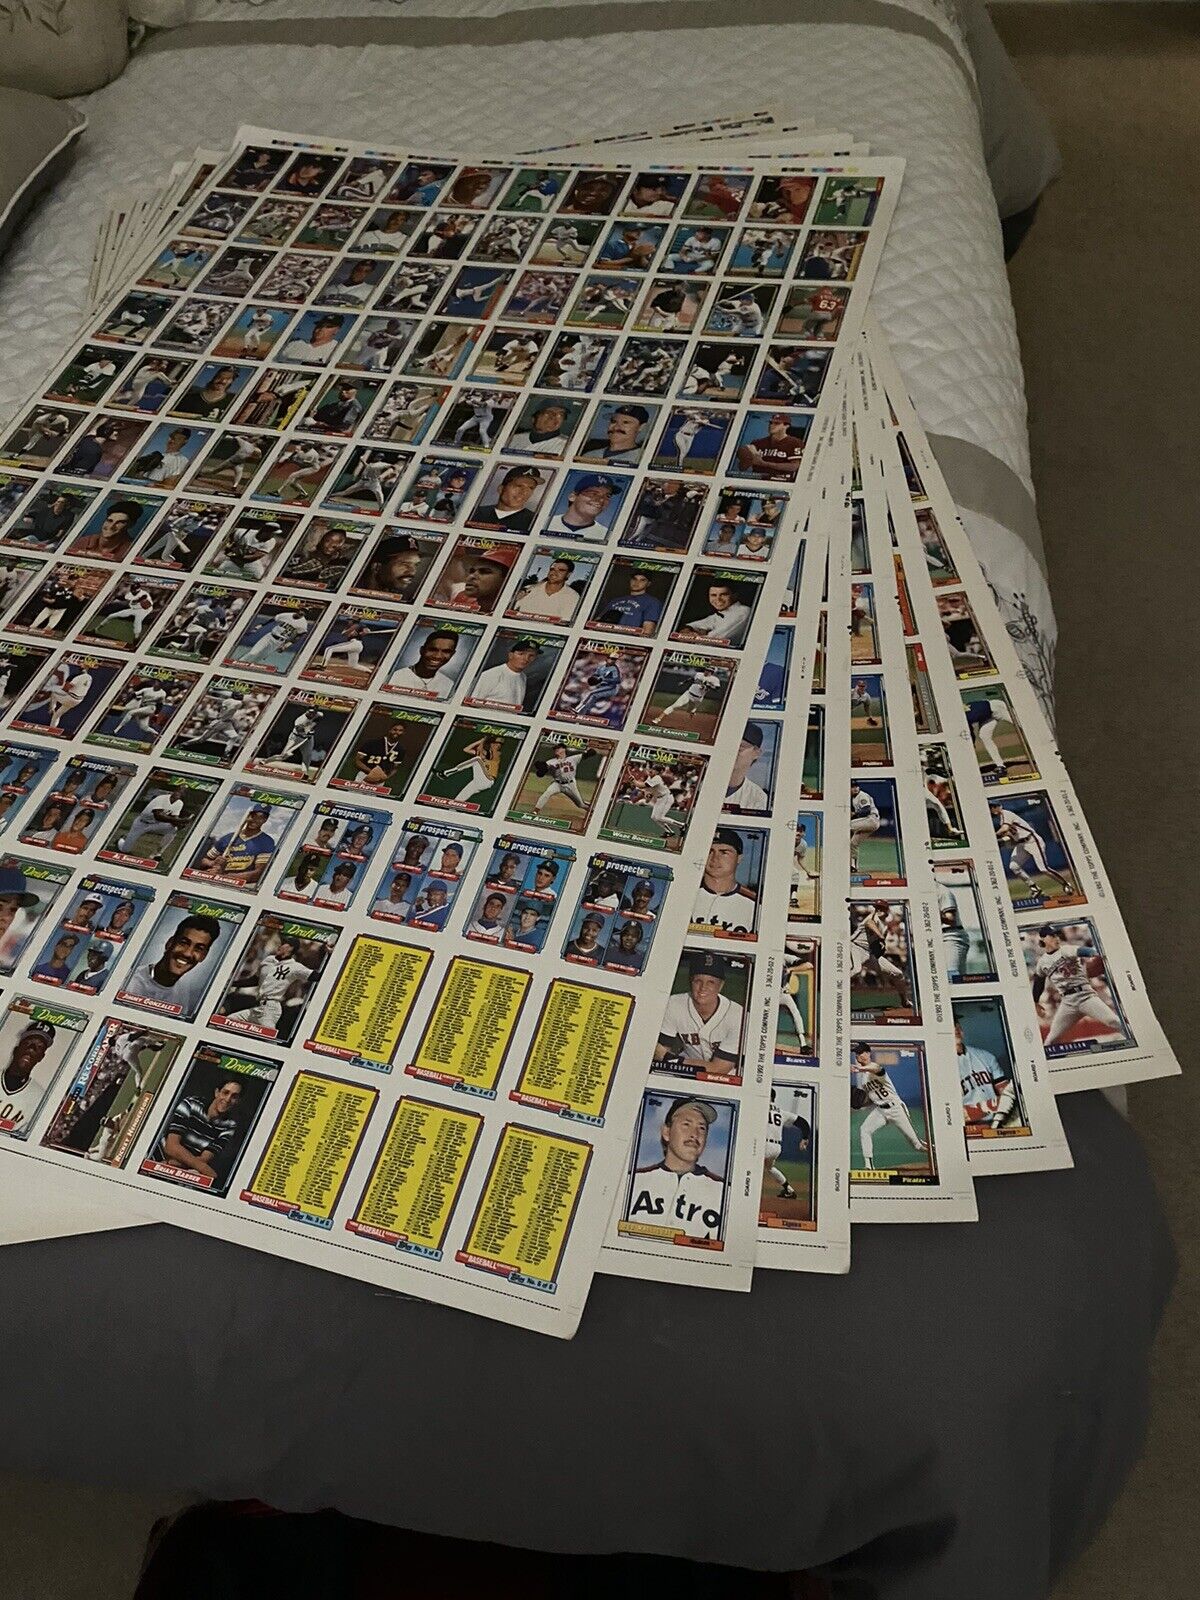 TOPPS 1992 FULL SET (792 CARDS) UNCUT BASEBALL CARDS (6 SHEETS OF 132 CARDS EA)